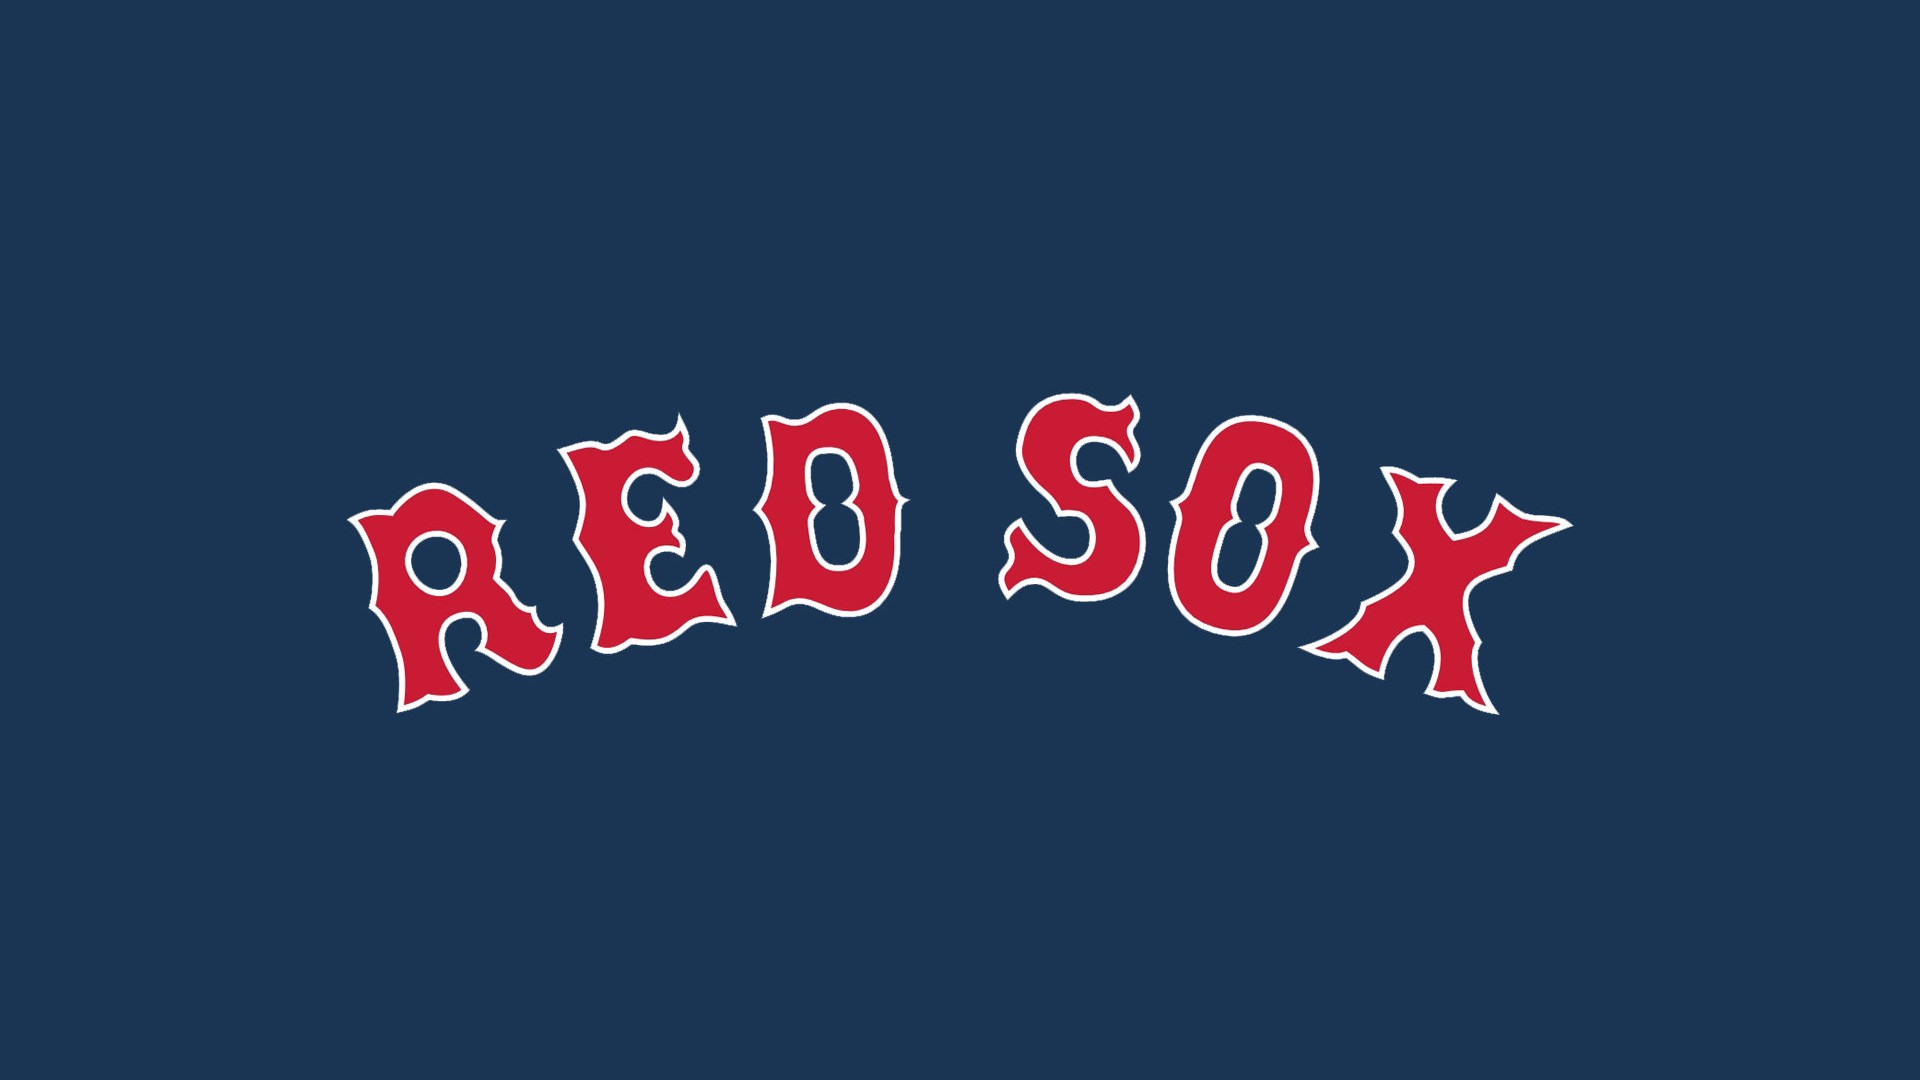 HD Desktop Wallpaper Boston Red Sox with high-resolution 1920x1080 pixel. You can use this wallpaper for Mac Desktop Wallpaper, Laptop Screensavers, Android Wallpapers, Tablet or iPhone Home Screen and another mobile phone device